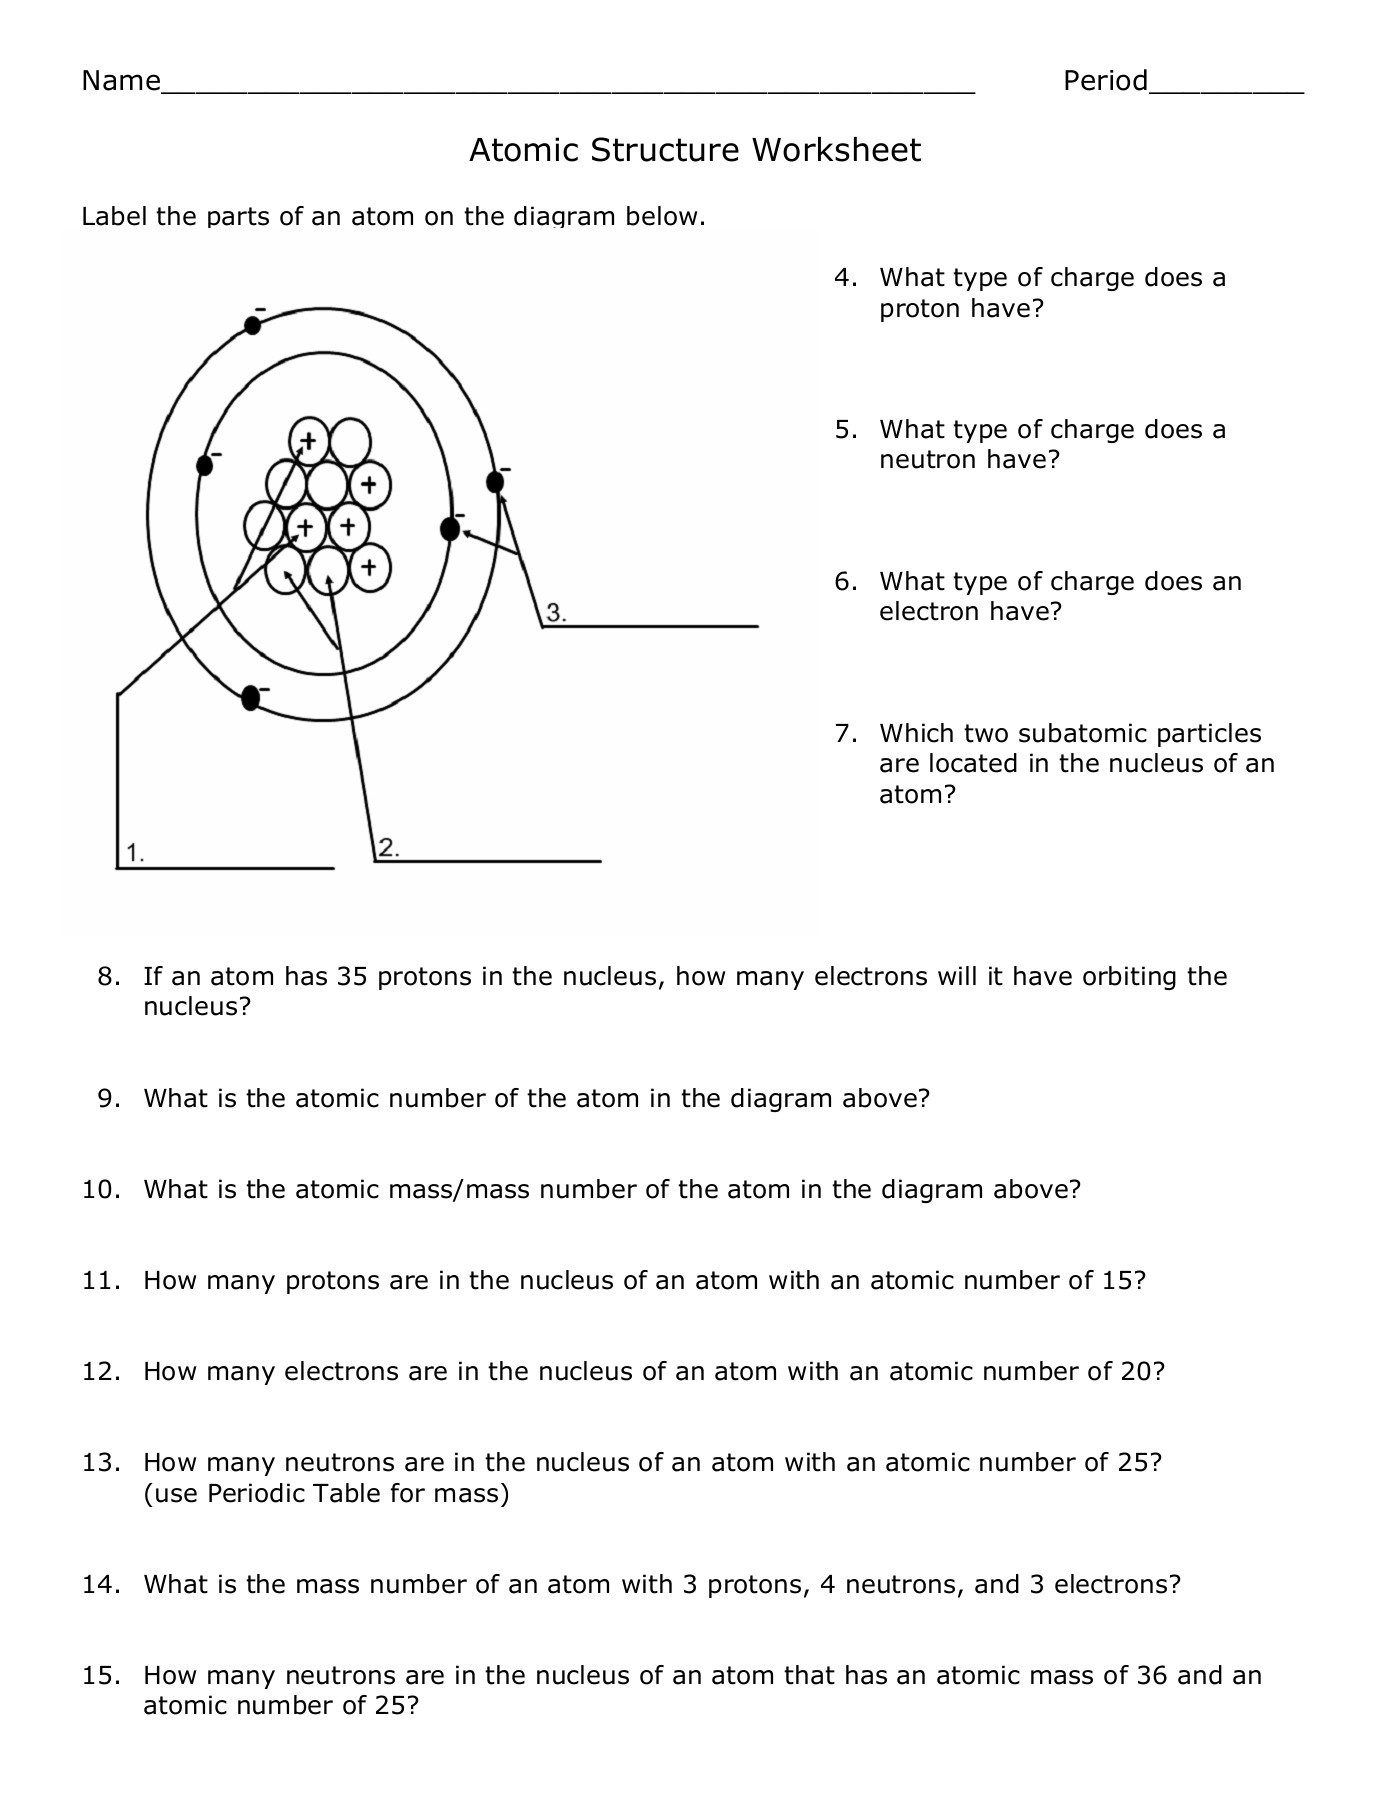 Bohr atomic Models Worksheet Answers atomic Structure Worksheet Shelby County Schools Pages 1